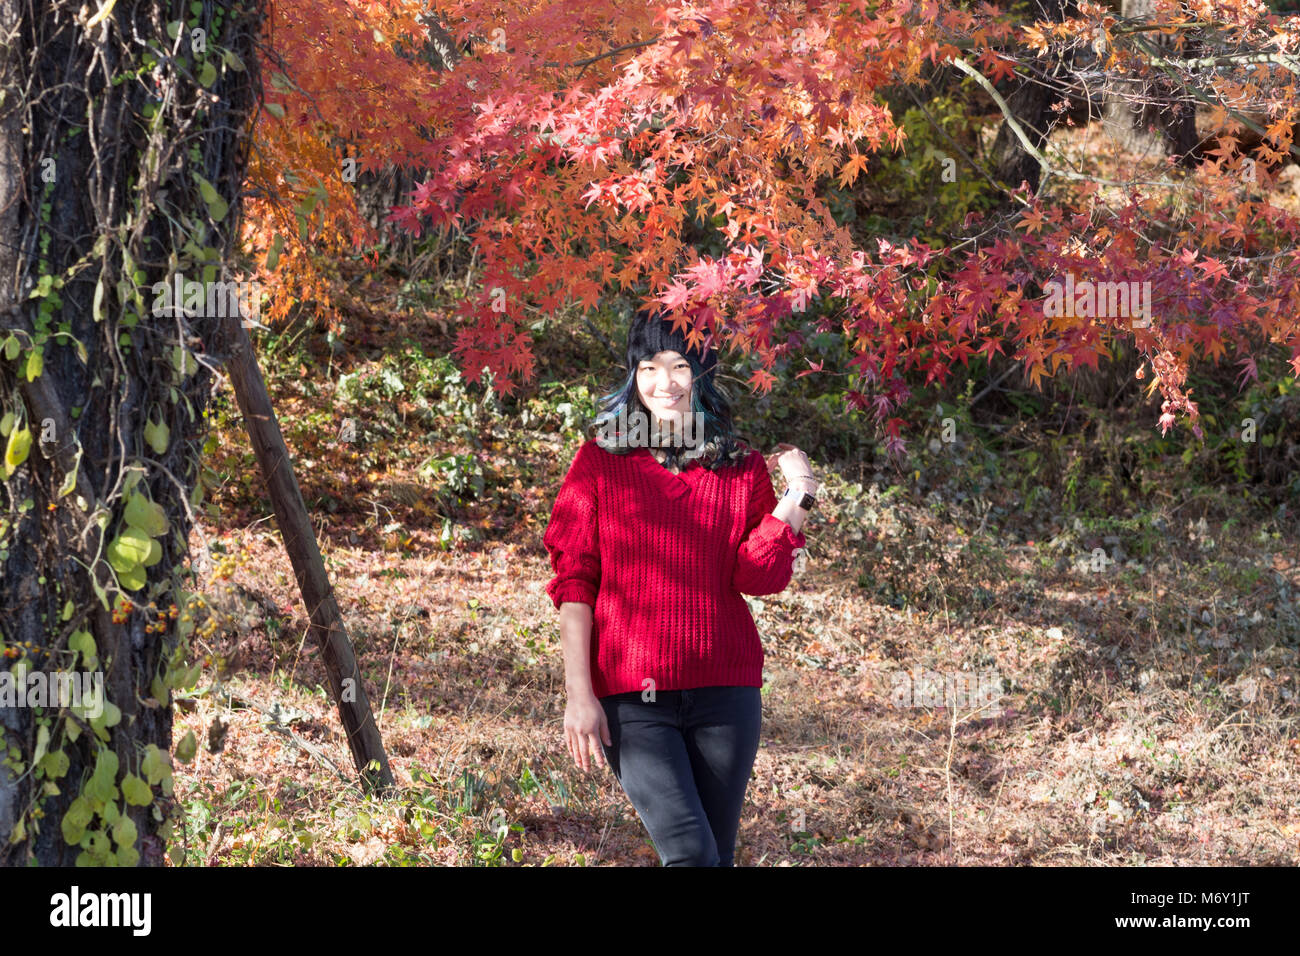 Young female posing in front of beautiful trees in Autumn when the leaves are red, orange and yellow Stock Photo